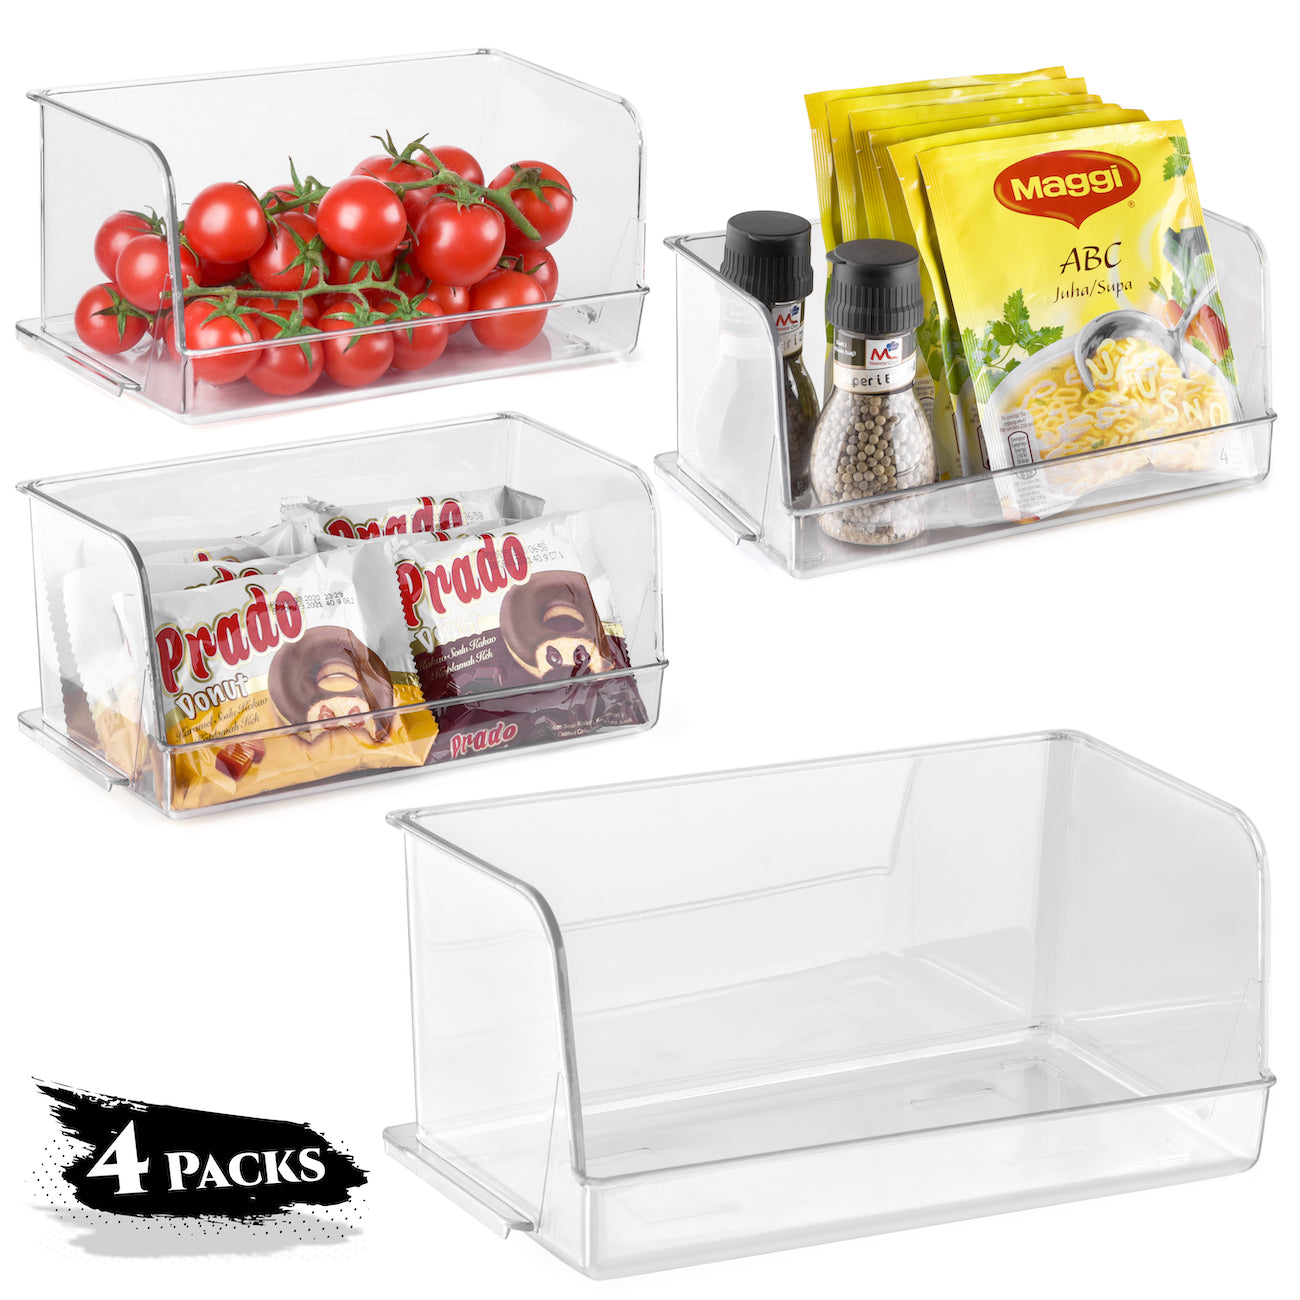 Clear Plastic Storage Bins with Handles (Small, 4-Pack) – Sorbus Home